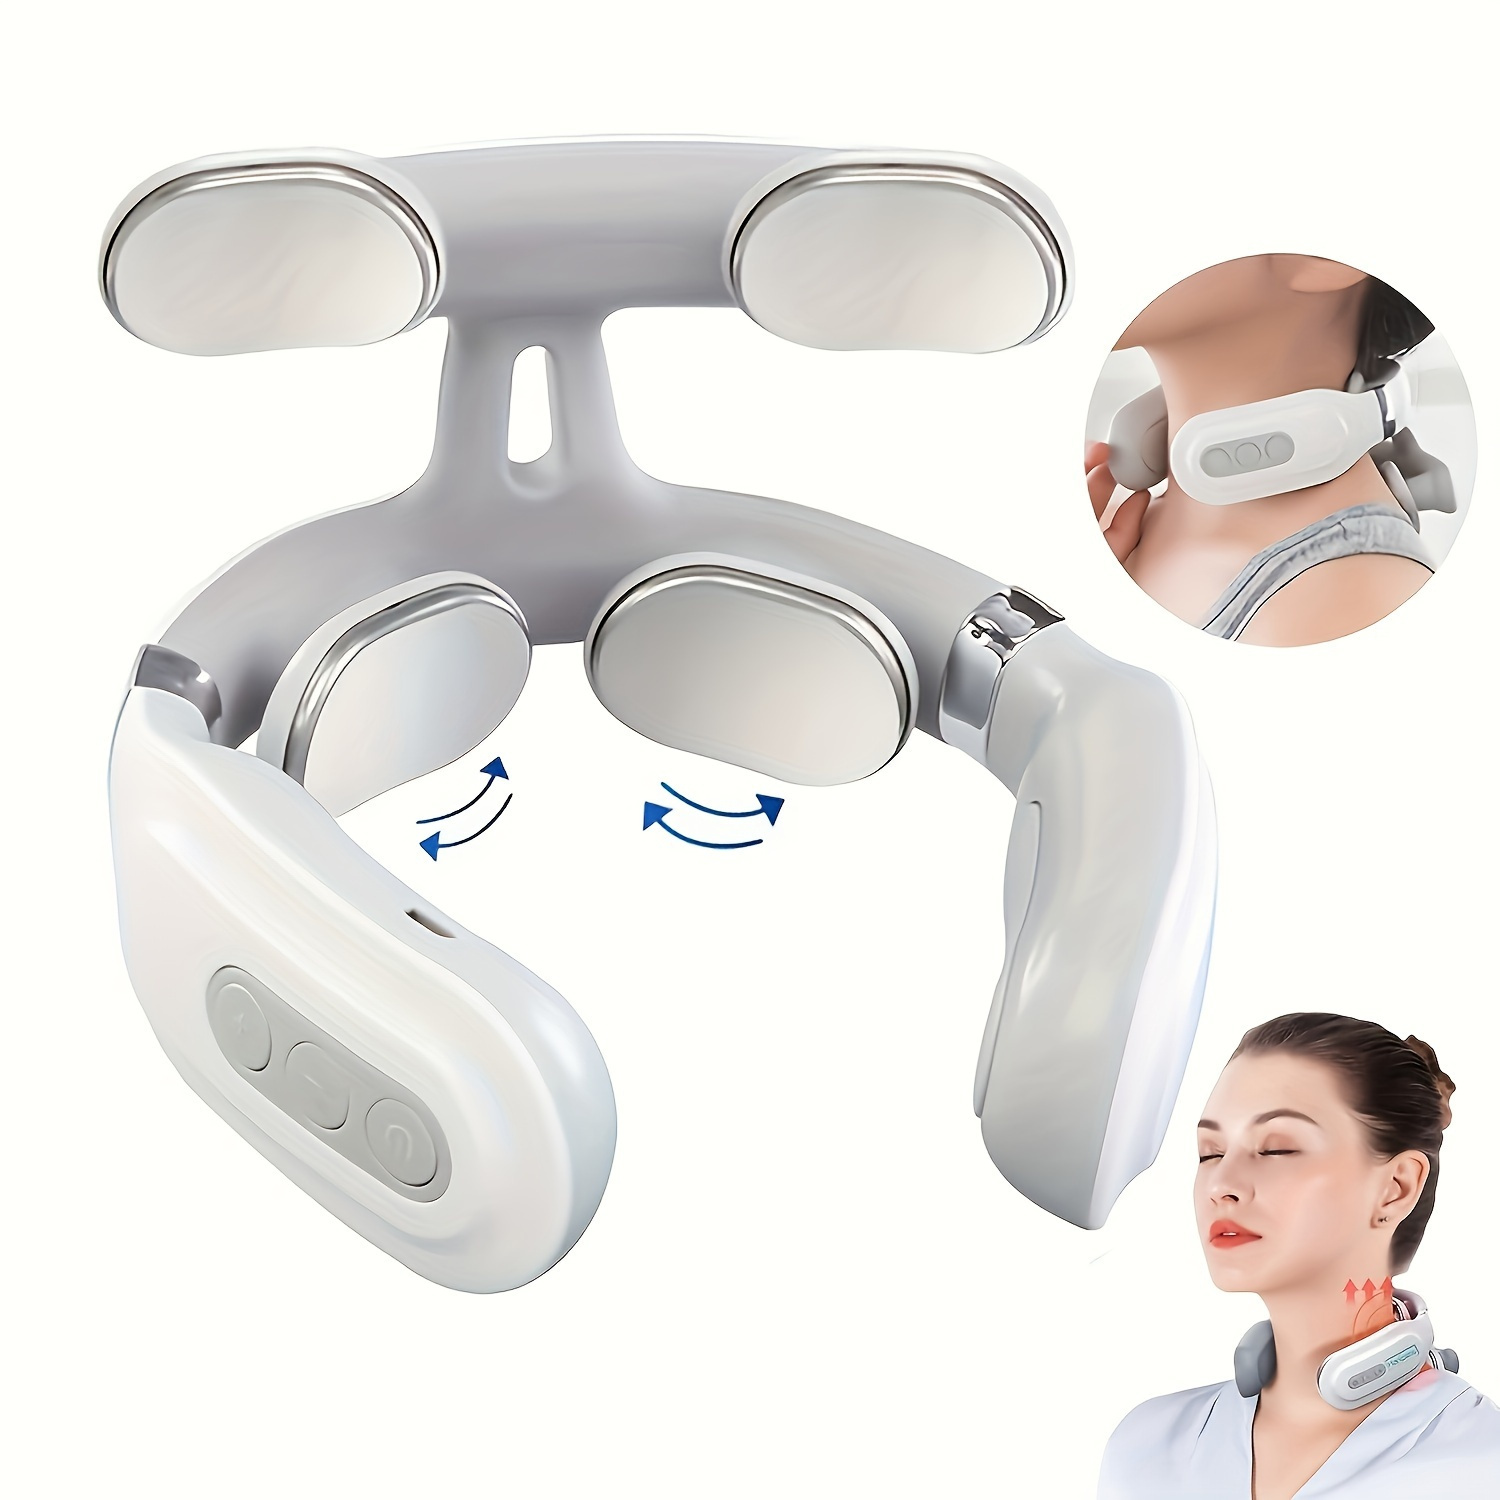 

Portable Smart Neck & Shoulder Massager - Deep Tissue Kneading, Usb Rechargeable, Ideal Holiday Gift For Men & Women